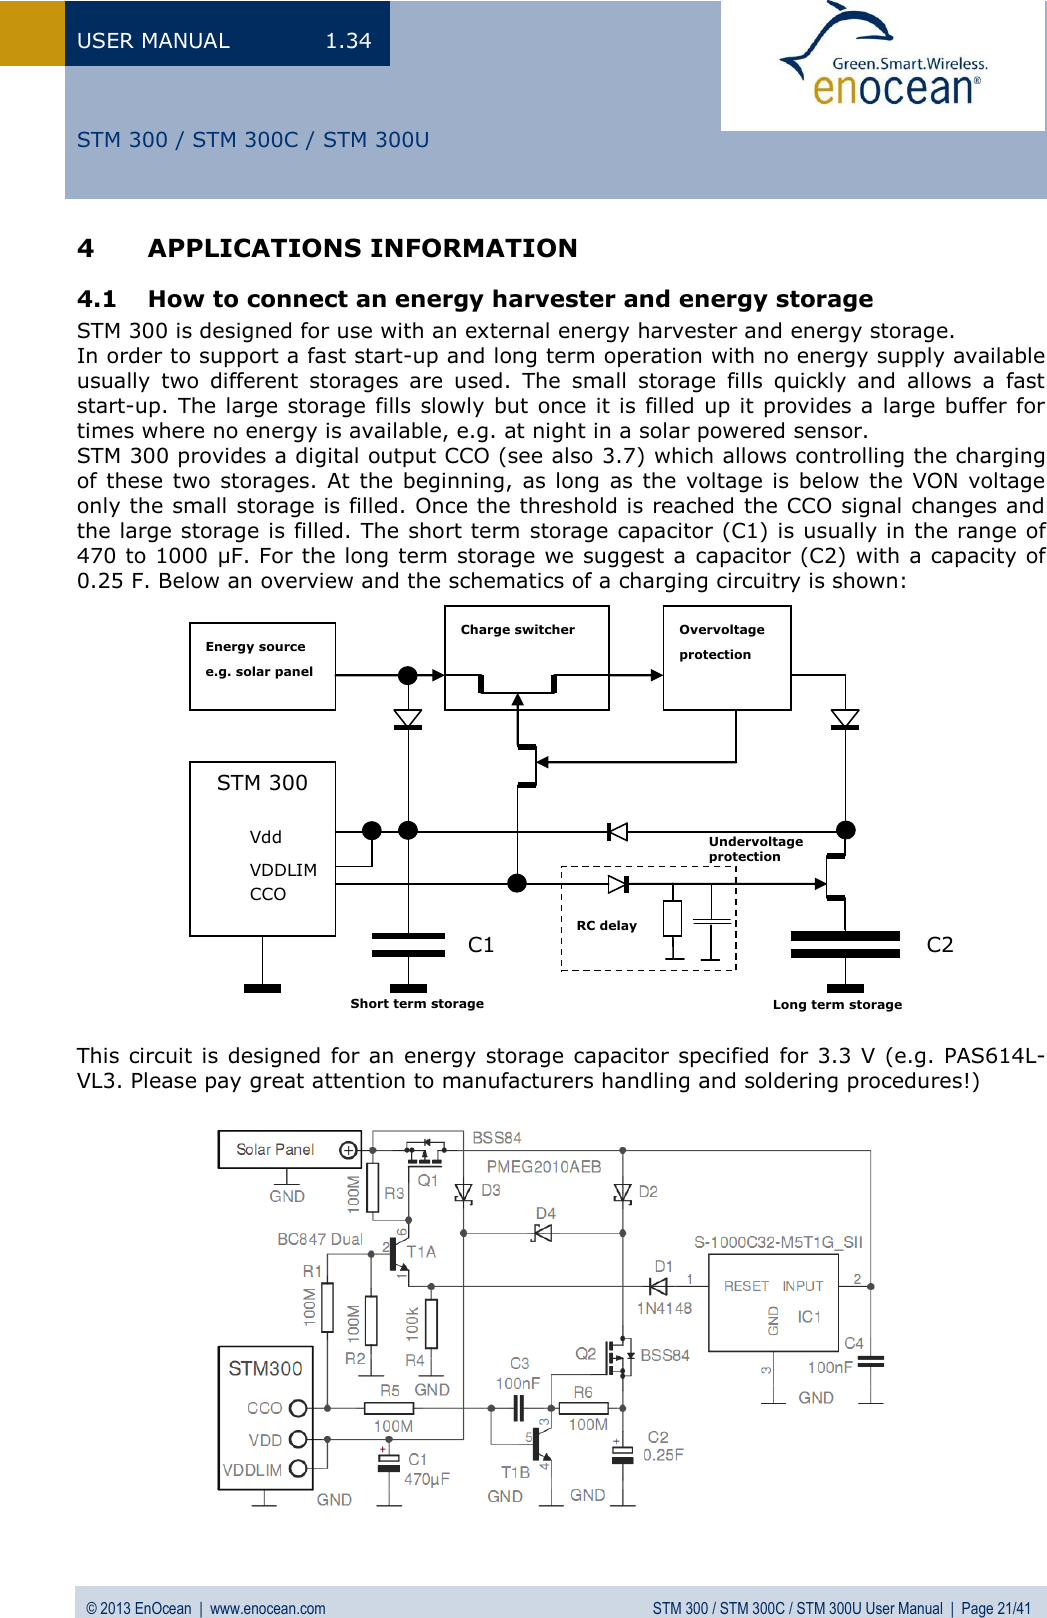 USER MANUAL  1.34 © 2013 EnOcean  |  www.enocean.com  STM 300 / STM 300C / STM 300U User Manual  |  Page 21/41   STM 300 / STM 300C / STM 300U Energy source e.g. solar panel Charge switcher Overvoltage protection STM 300  Vdd  VDDLIM   CCO    Undervoltage protection  RC delay Short term storage   Long term storage  4 APPLICATIONS INFORMATION 4.1 How to connect an energy harvester and energy storage STM 300 is designed for use with an external energy harvester and energy storage. In order to support a fast start-up and long term operation with no energy supply available usually  two  different  storages  are  used.  The  small  storage  fills  quickly  and  allows  a  fast start-up. The large storage fills slowly but once it is filled up it provides a  large buffer for times where no energy is available, e.g. at night in a solar powered sensor. STM 300 provides a digital output CCO (see also 3.7) which allows controlling the charging of these two storages.  At  the beginning,  as long as the voltage is below the VON  voltage only the small storage is filled. Once the threshold is reached the CCO signal changes and the large storage is filled. The short term storage capacitor (C1) is usually in the range of 470 to 1000 µF. For the long term storage we suggest a capacitor (C2) with a capacity of 0.25 F. Below an overview and the schematics of a charging circuitry is shown:                   This circuit is designed for an energy storage  capacitor specified  for 3.3 V (e.g. PAS614L-VL3. Please pay great attention to manufacturers handling and soldering procedures!)  C1 C2 